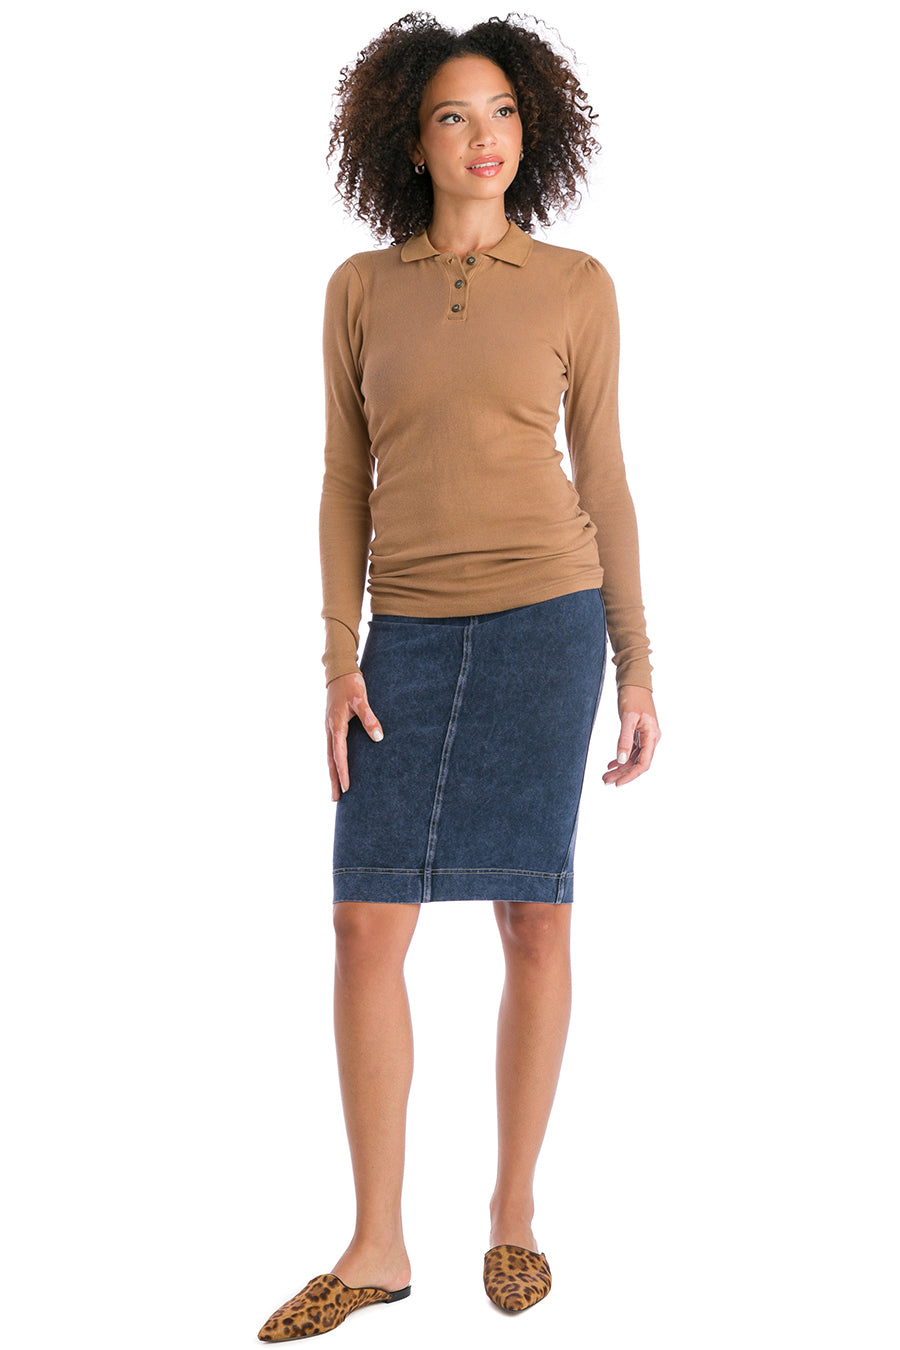 Hard Tail Forever Relaxed Fit Knee Jean Skirt - Mineral Wash 8 - S